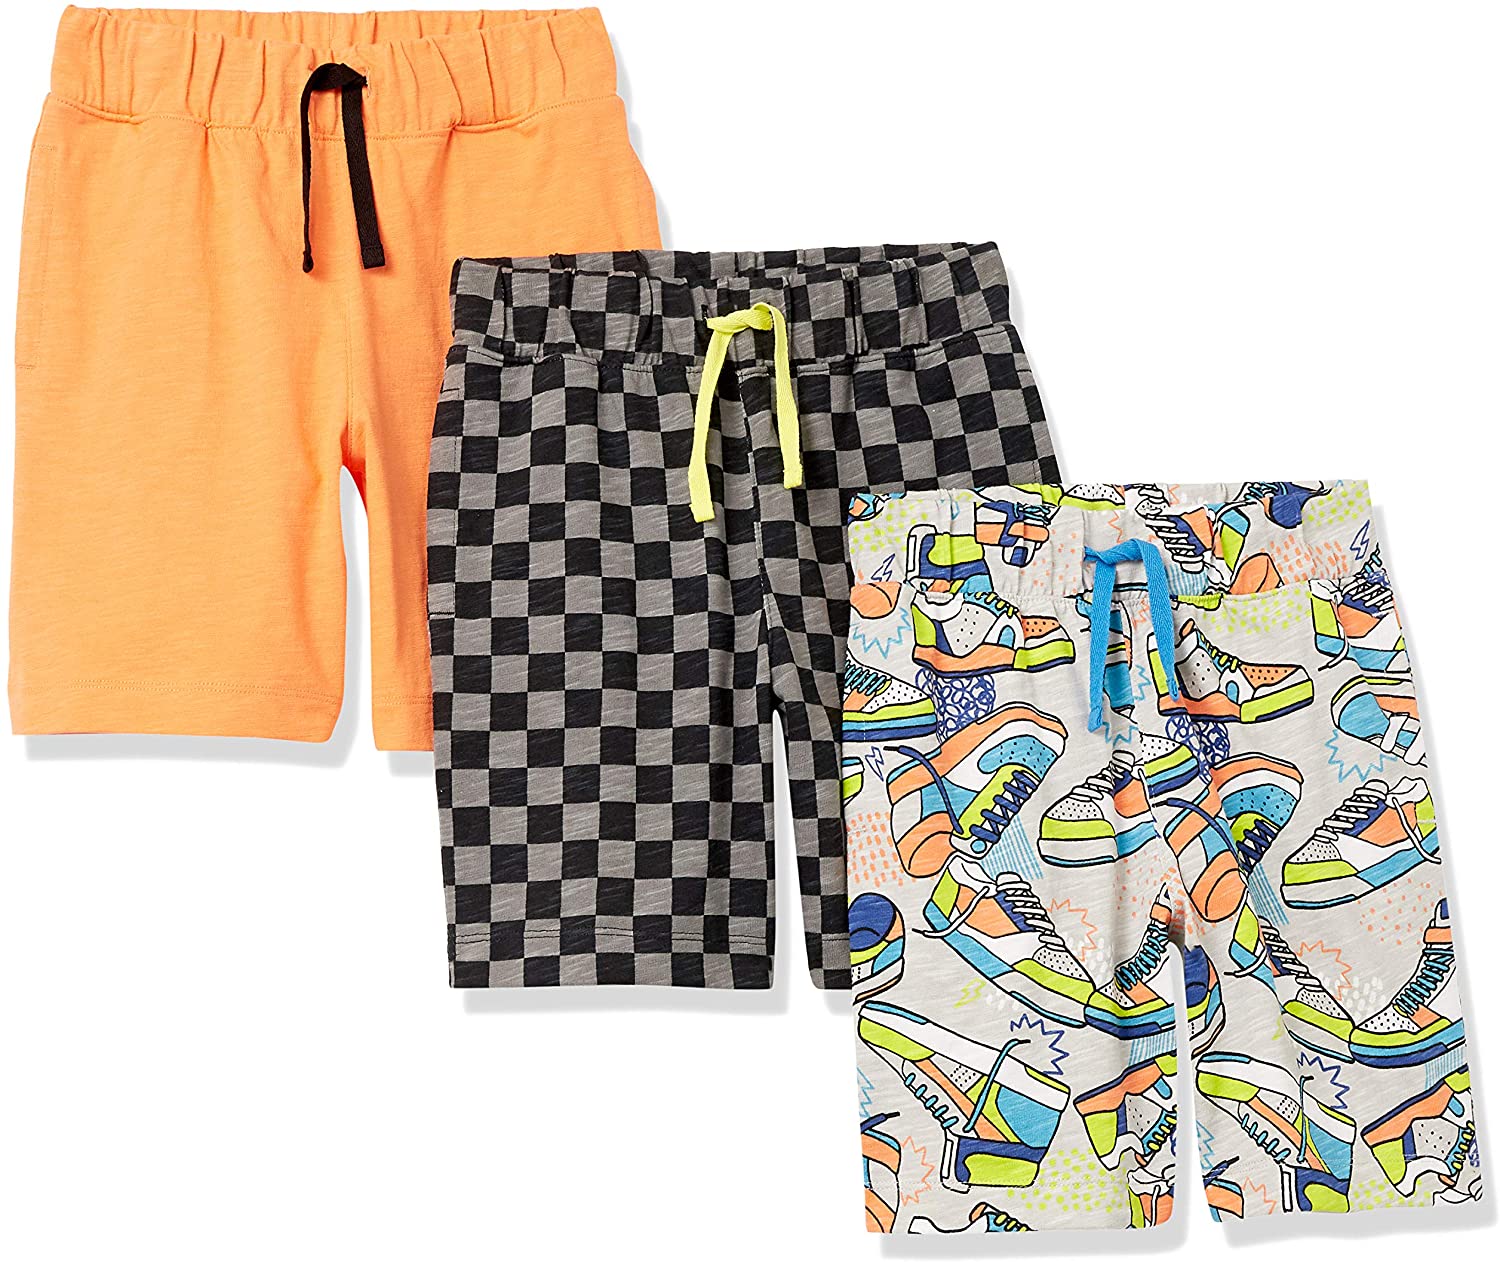 Clothing Shoes & Jewelry Spotted Zebra Boys' Knit Jersey Play Shorts